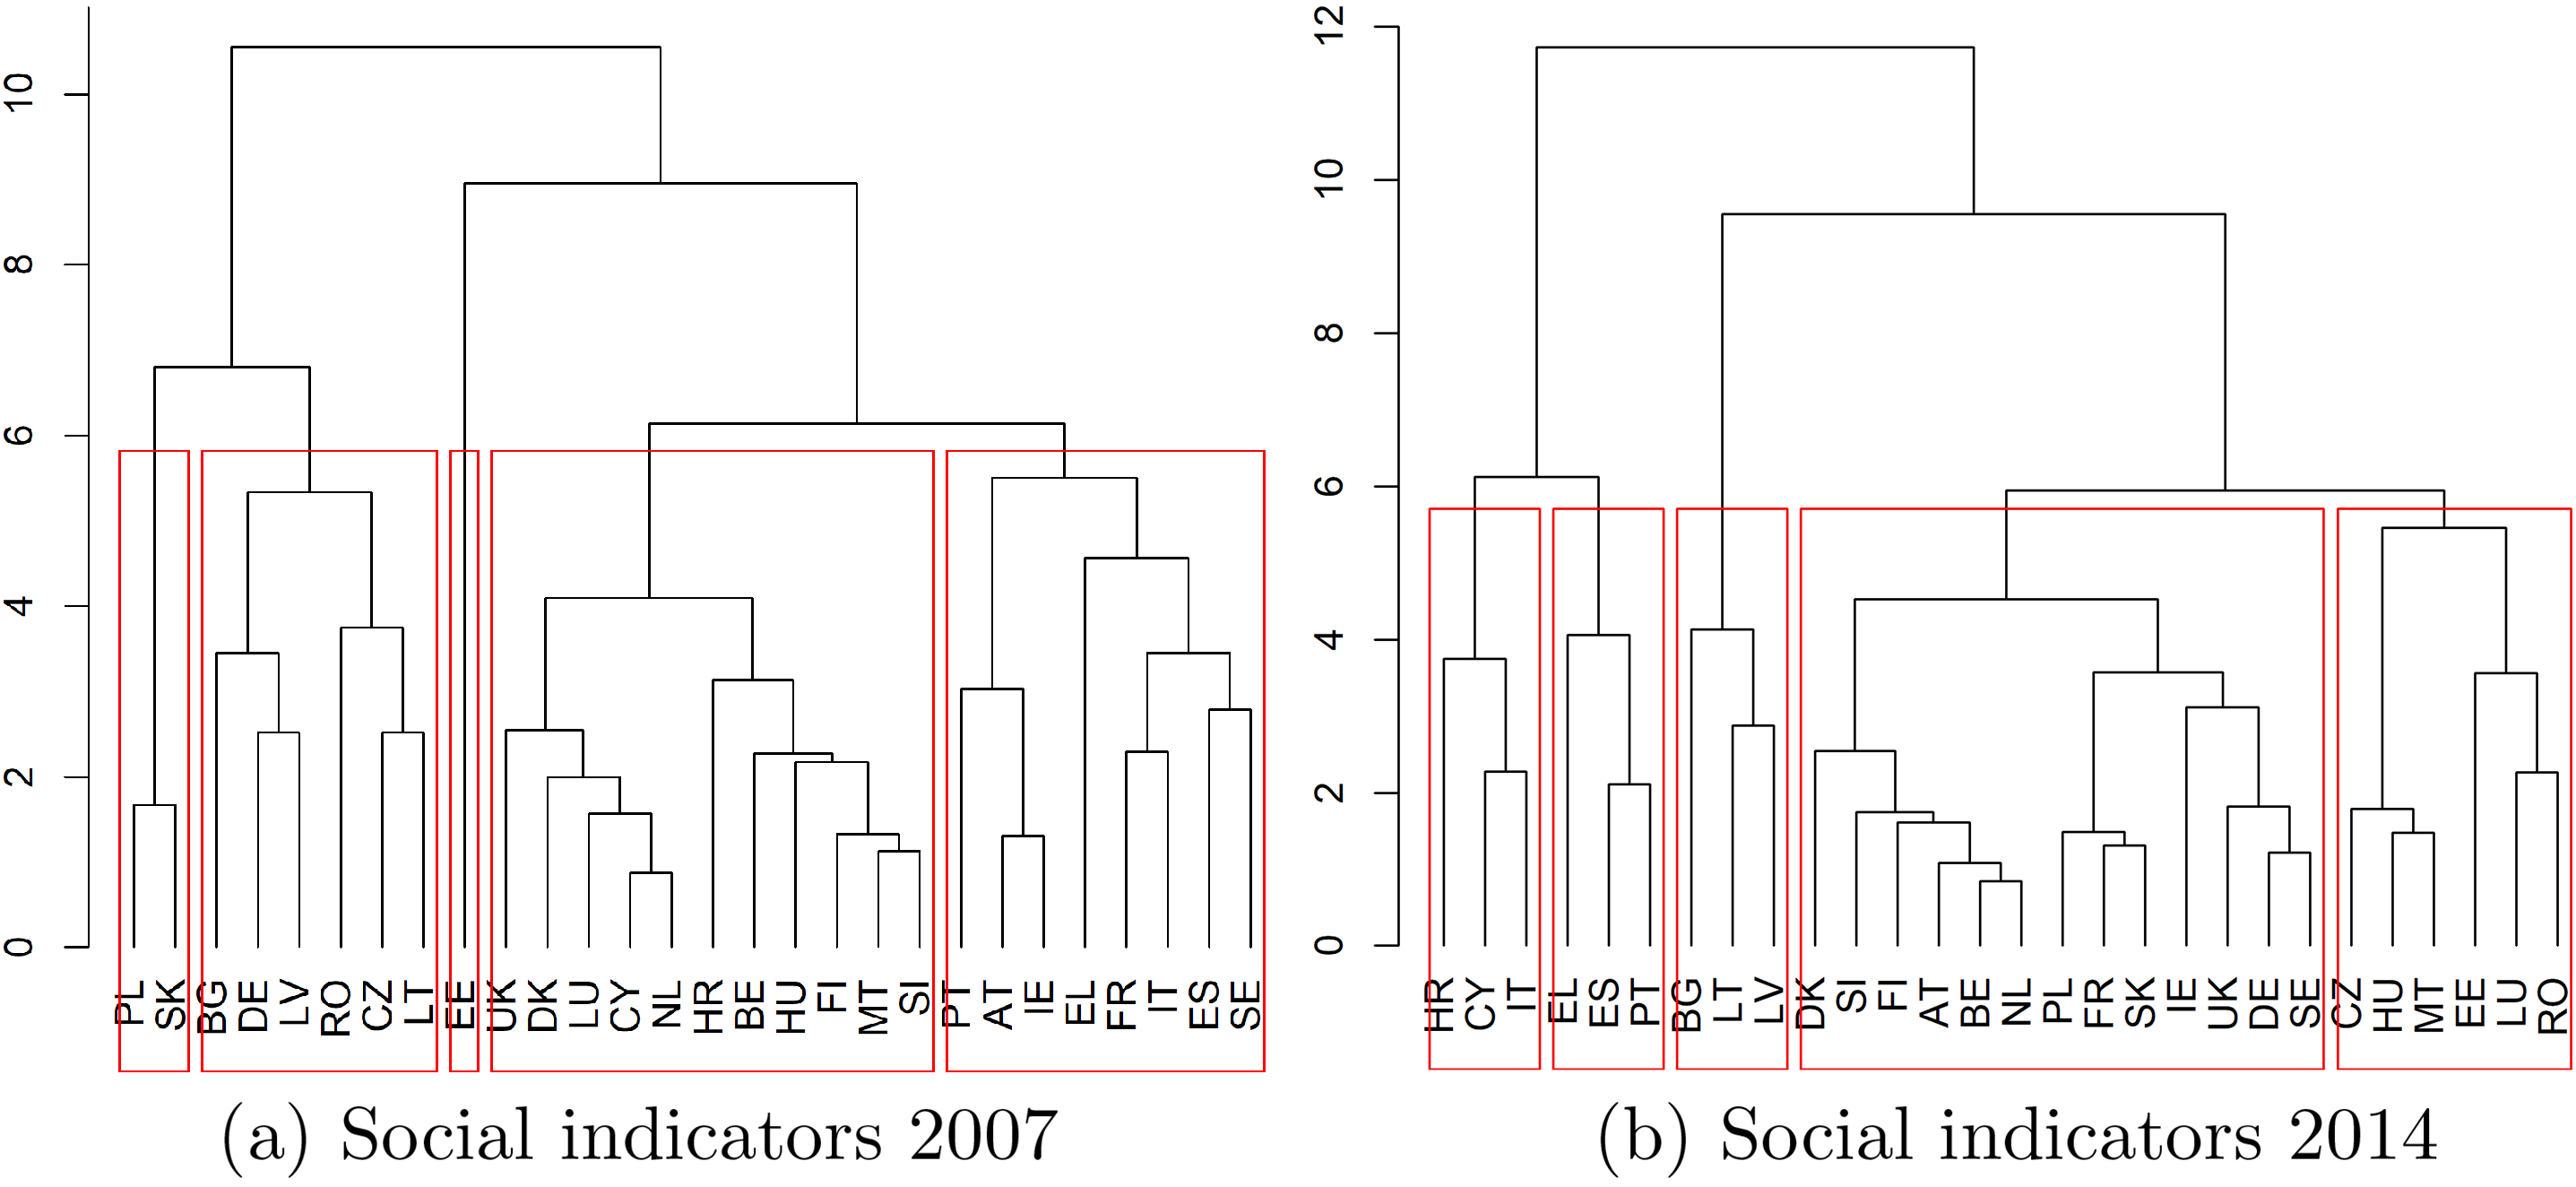 Cluster analysis for social indicators 2007, 2014